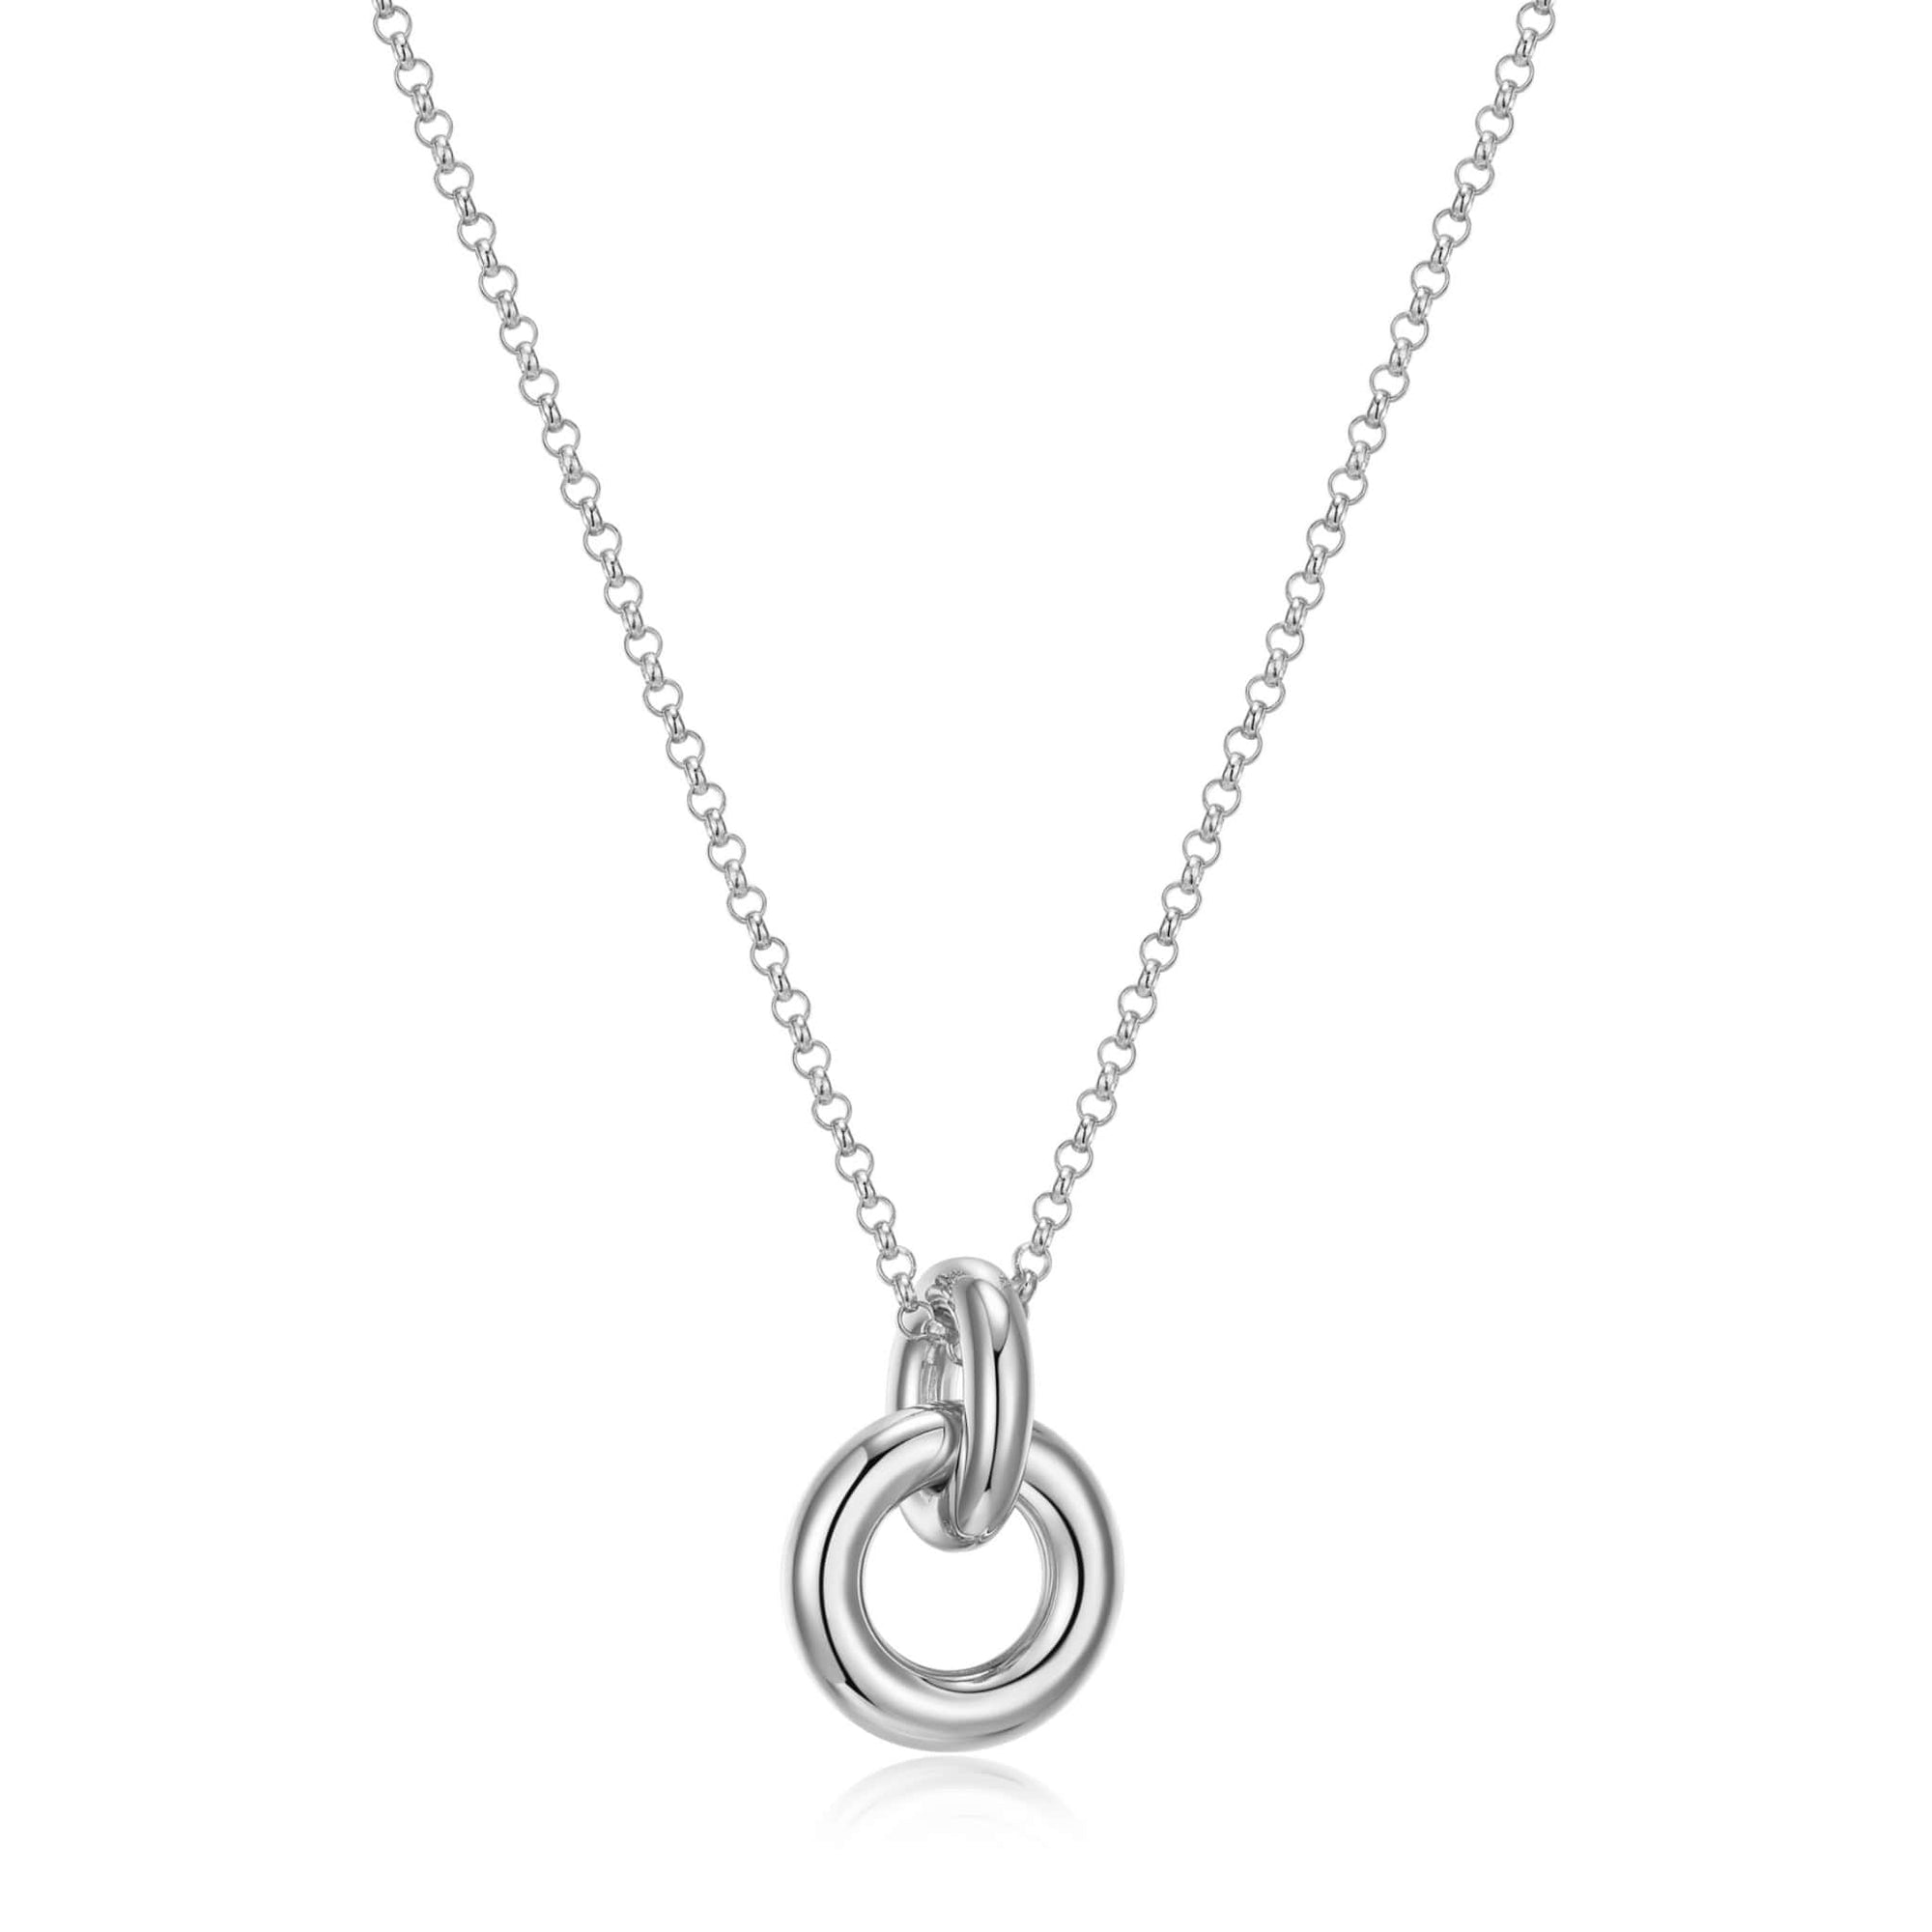 ELLE "Simpatico" Silver Necklace at Arman's Jewellers Kitchener